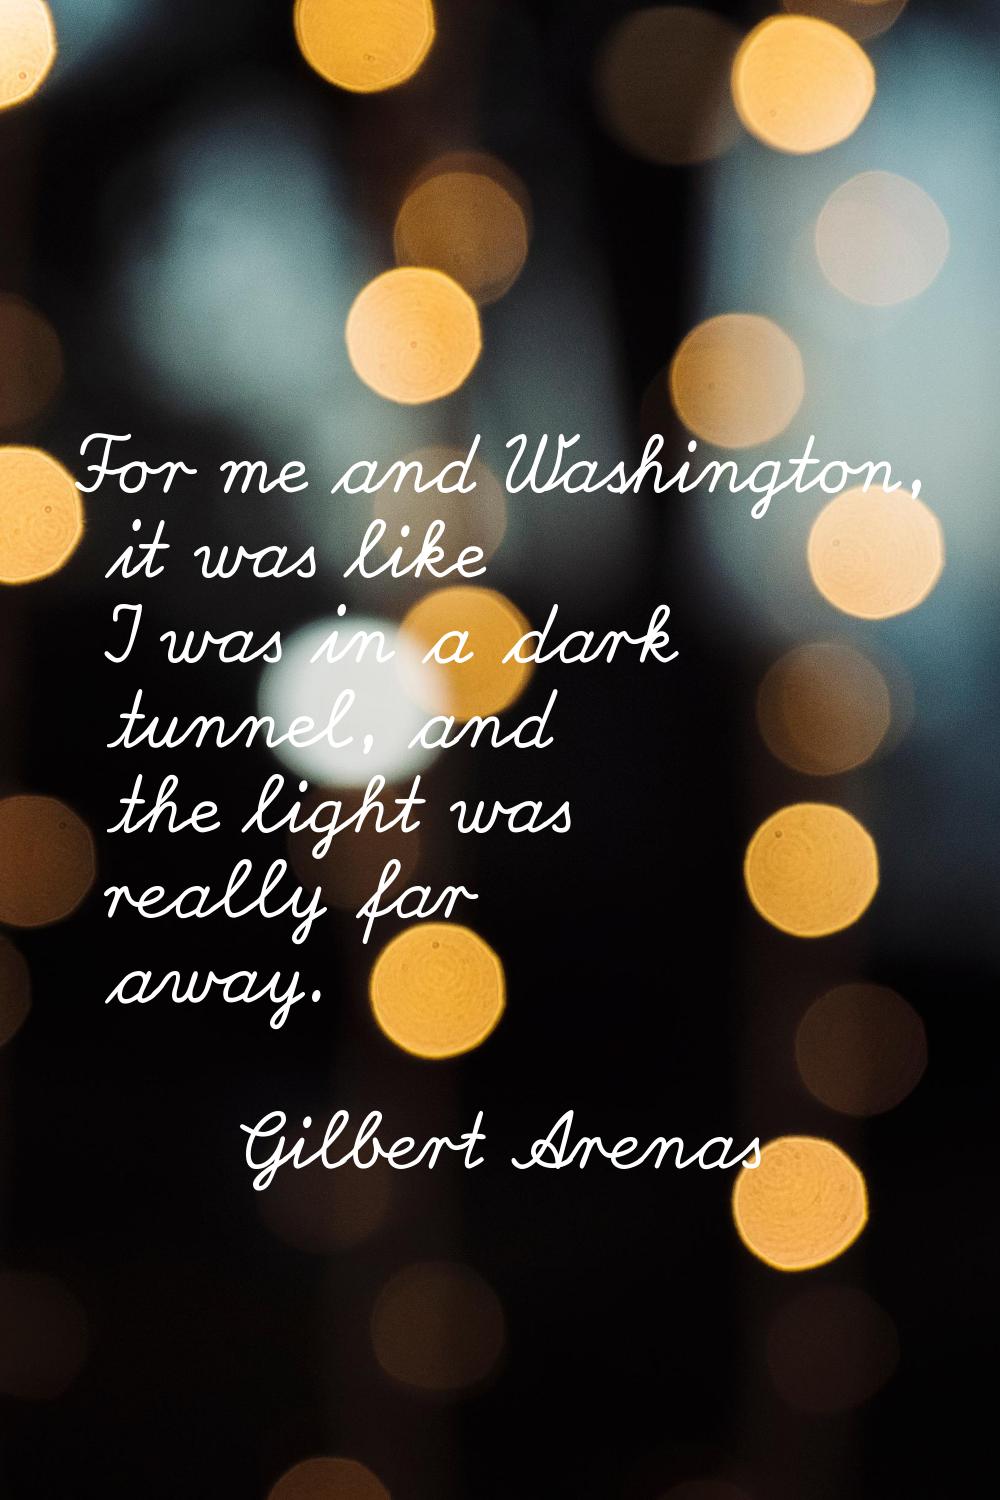 For me and Washington, it was like I was in a dark tunnel, and the light was really far away.